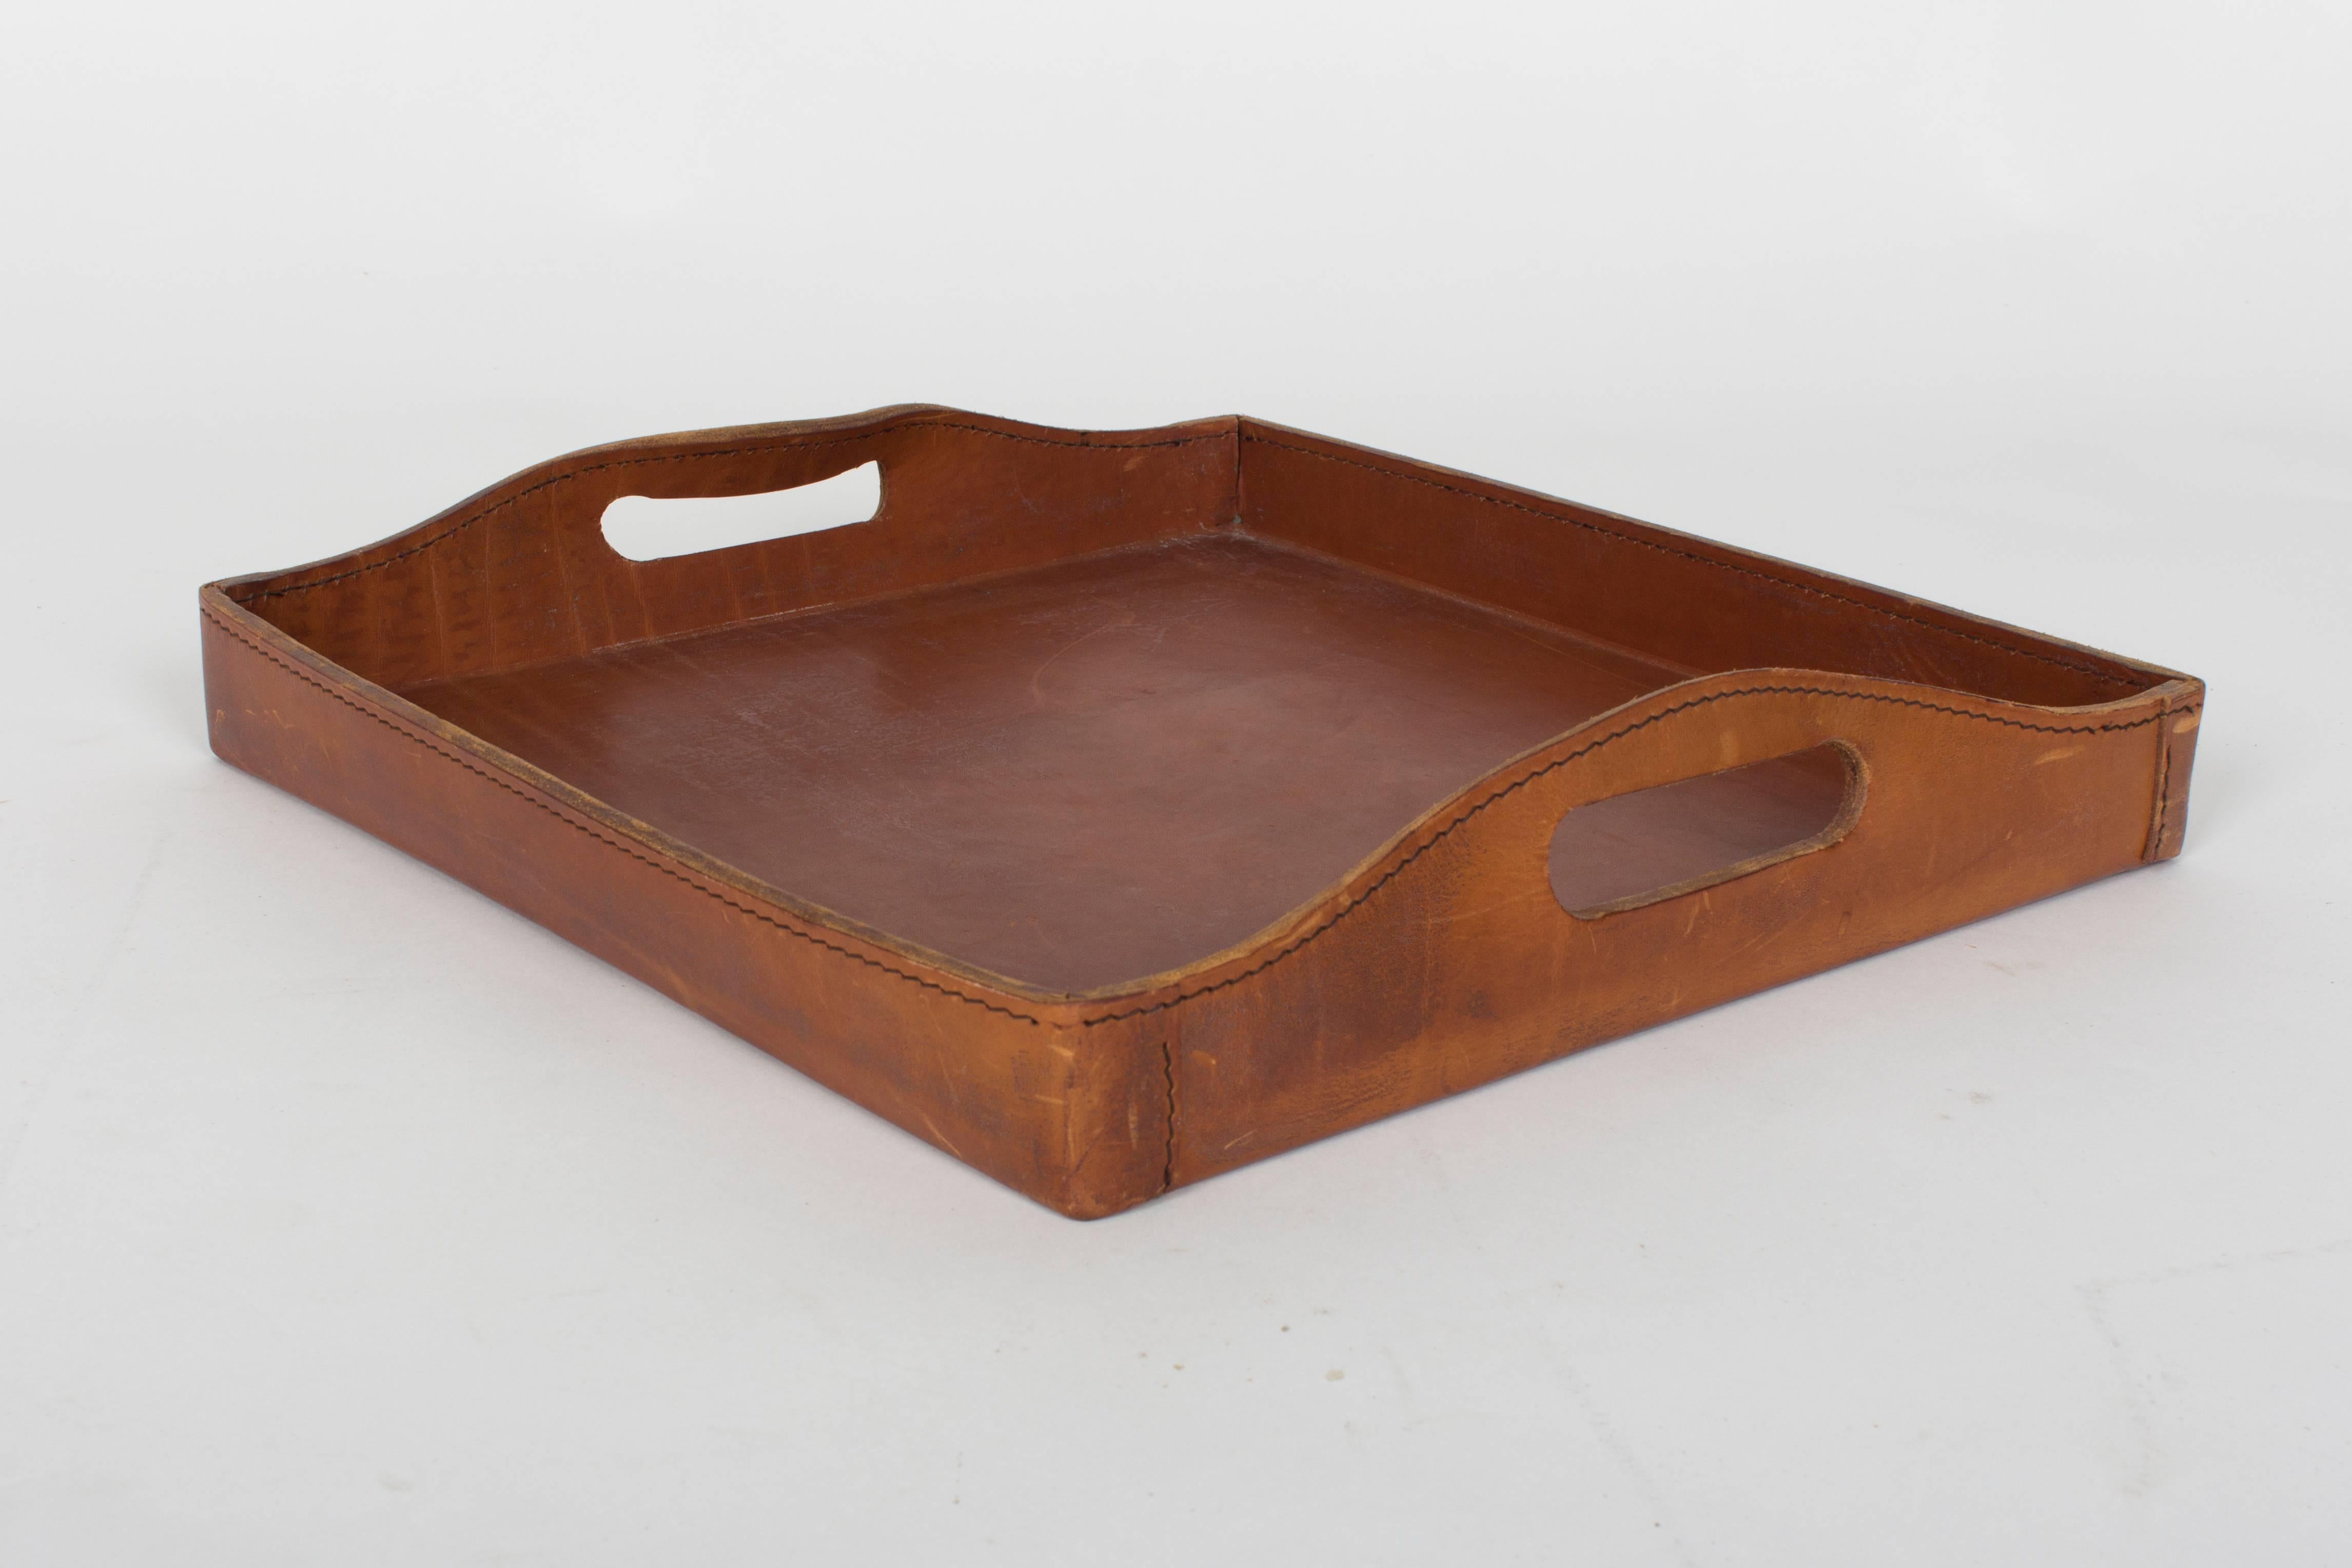 Mid-20th Century Rare Large and Thick Leather Serving Tray by the Auböck Workshop, Vienna, 1950s For Sale